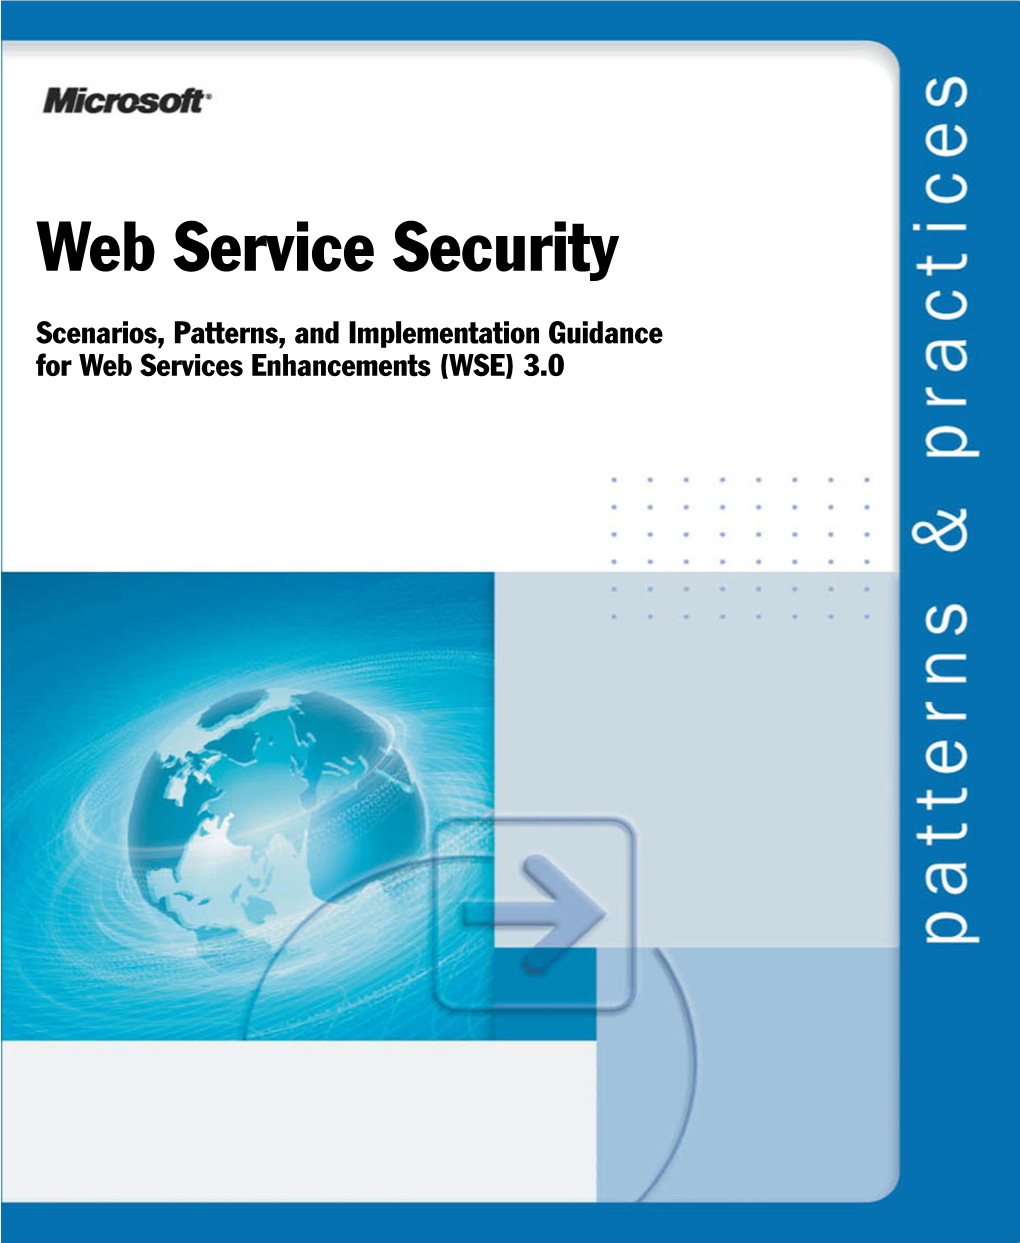 Web Service Security Guide Discusses Include: ● Choosing Between Message Layer Security and Transport Layer Security